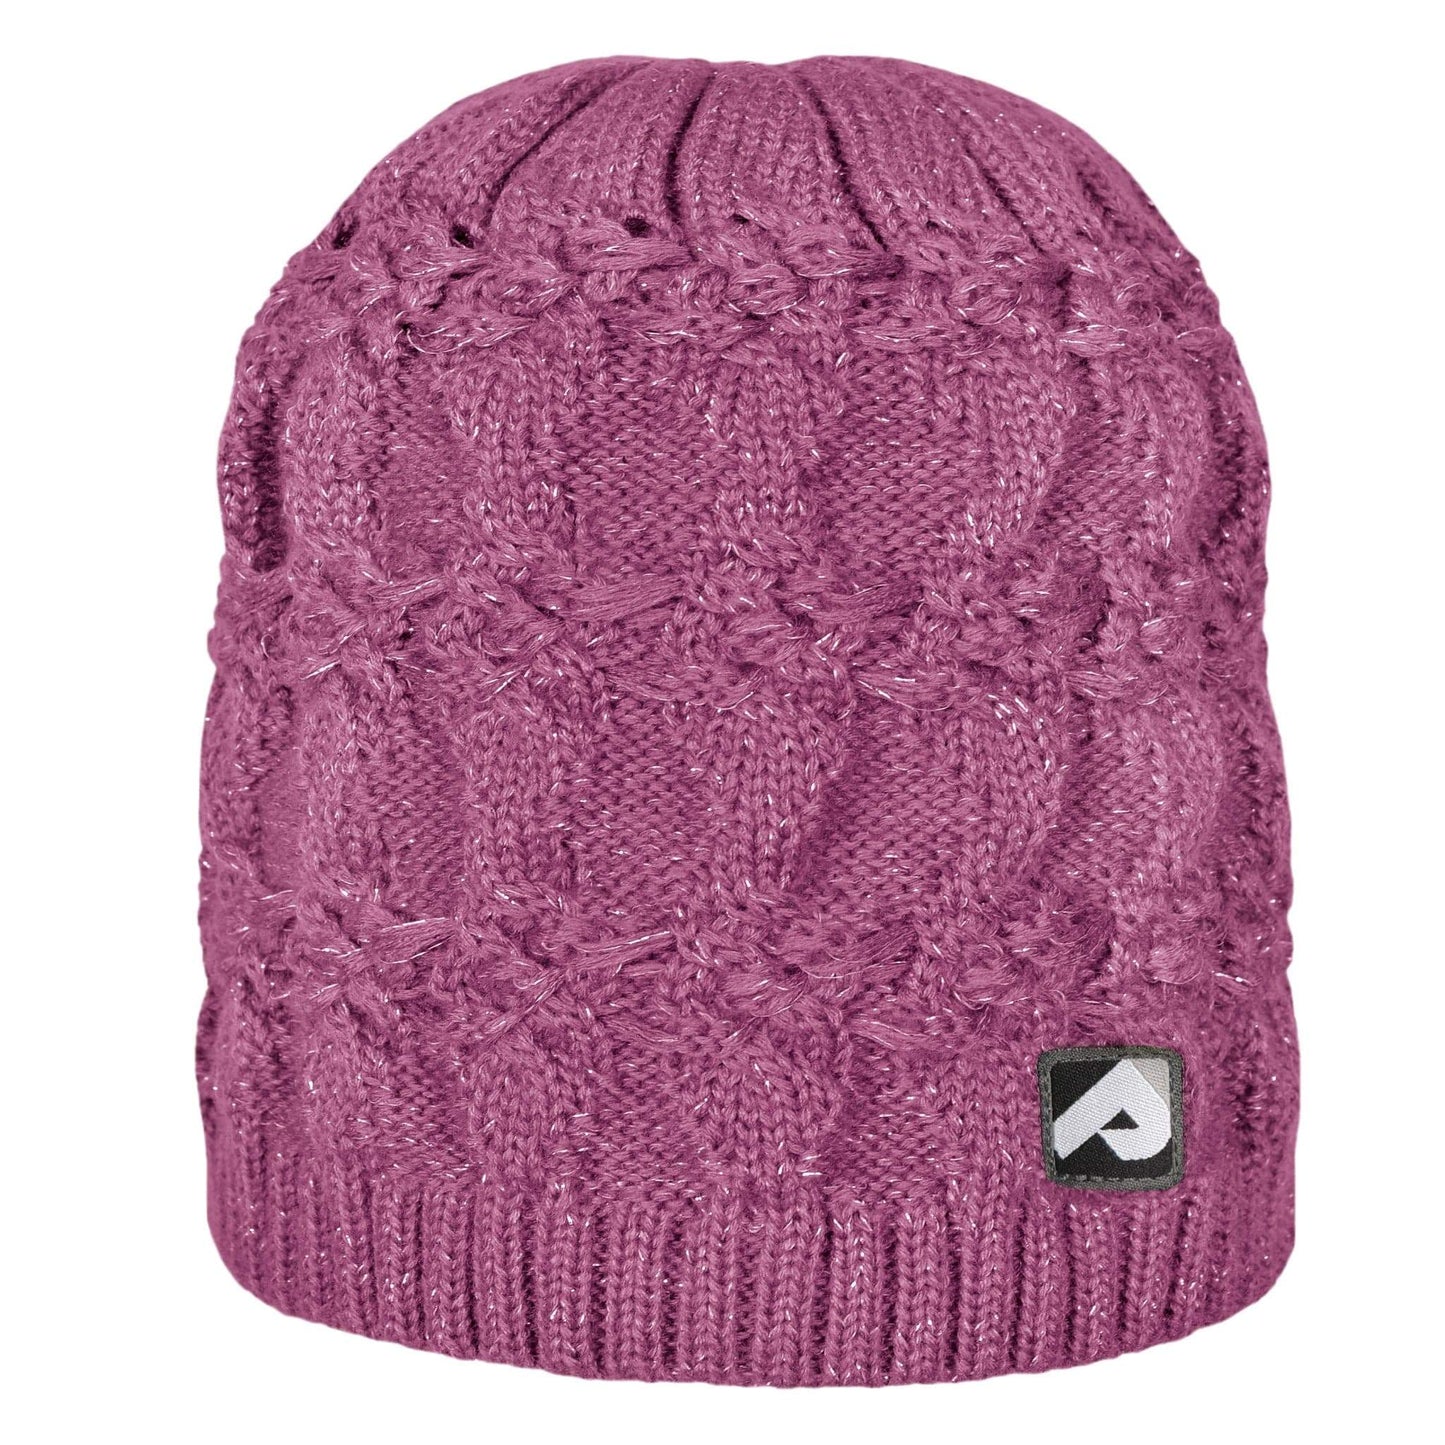 Knitted acrylic hat - prunette